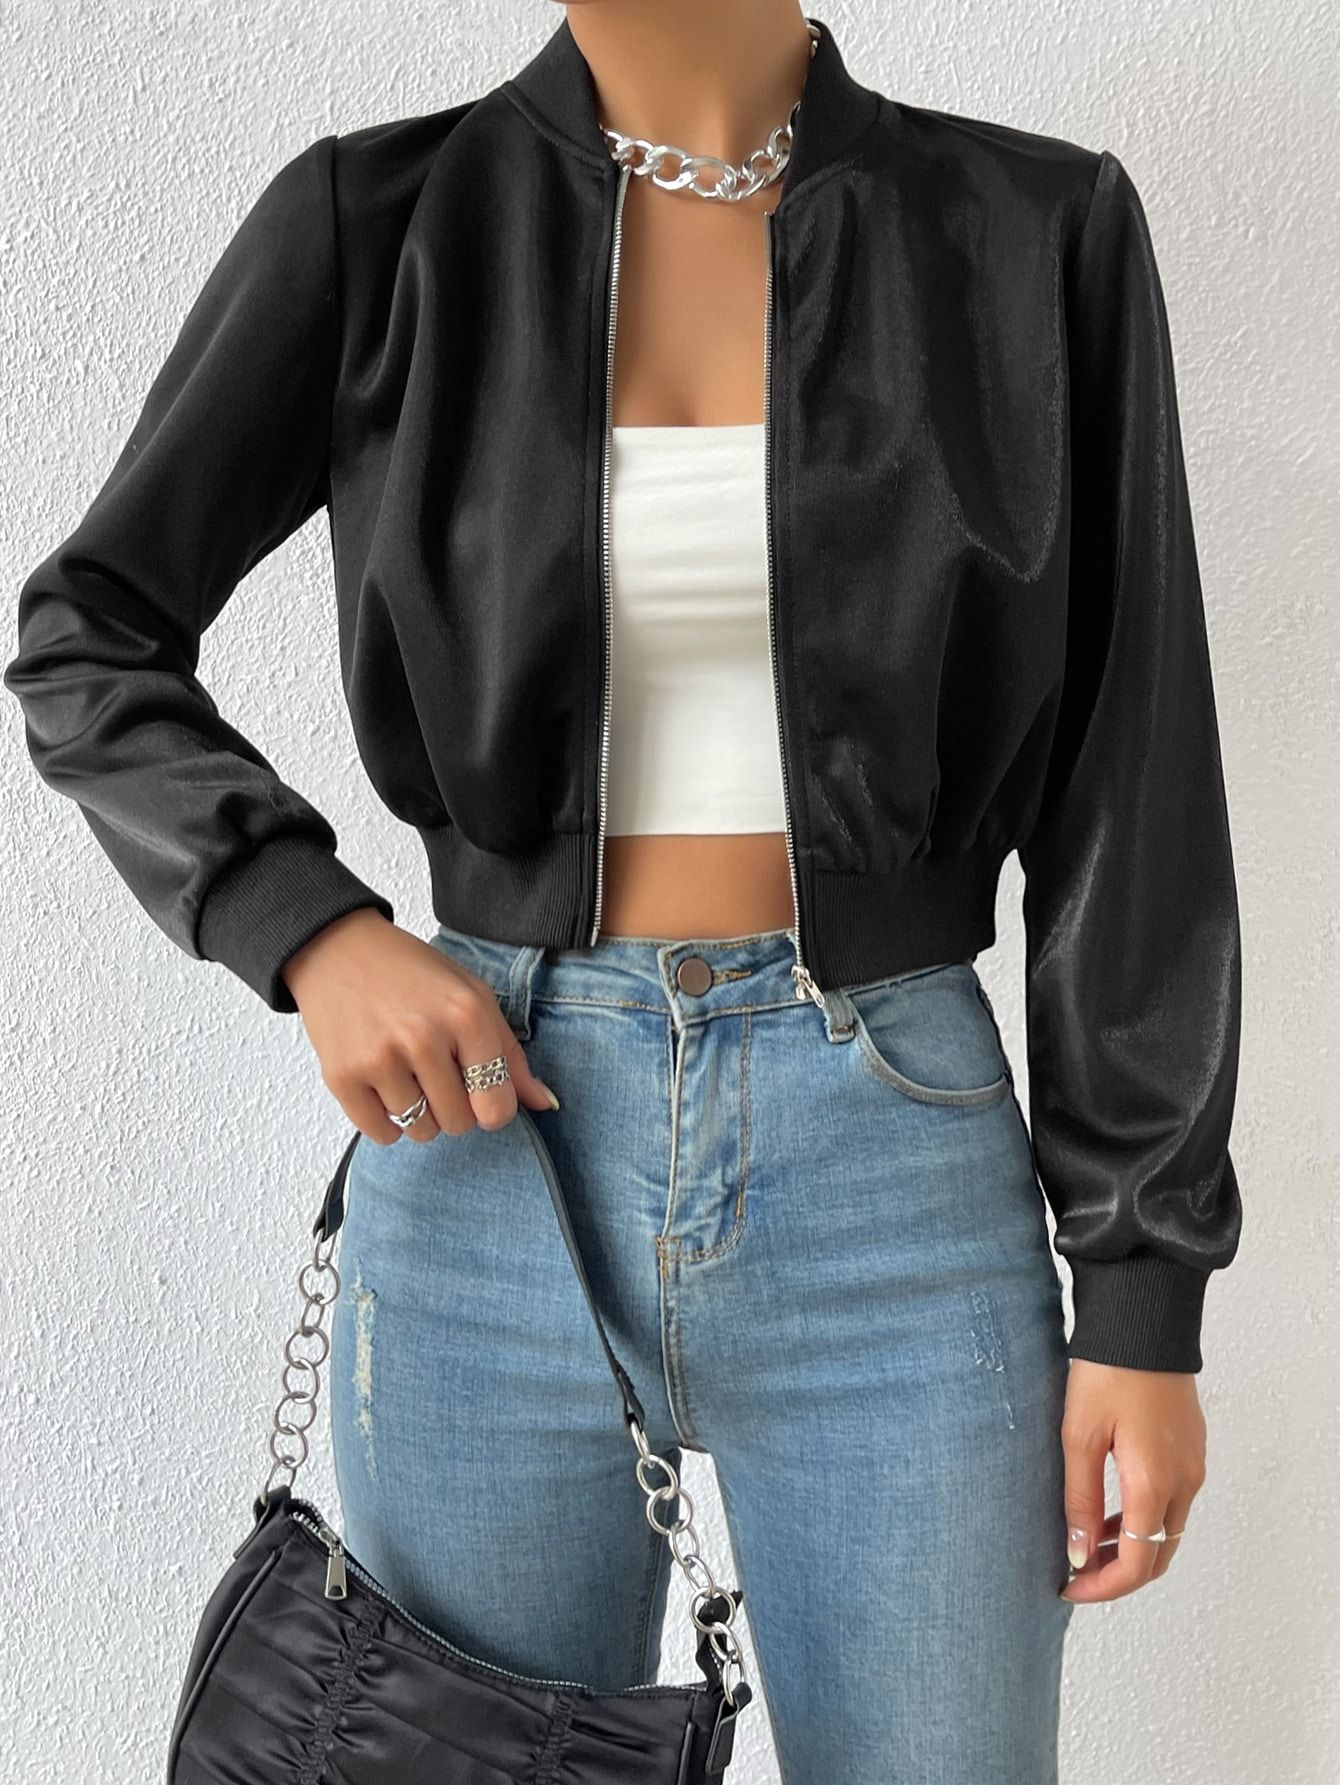 Best 15 Cropped Bomber Jacket Outfit Ideas for Women